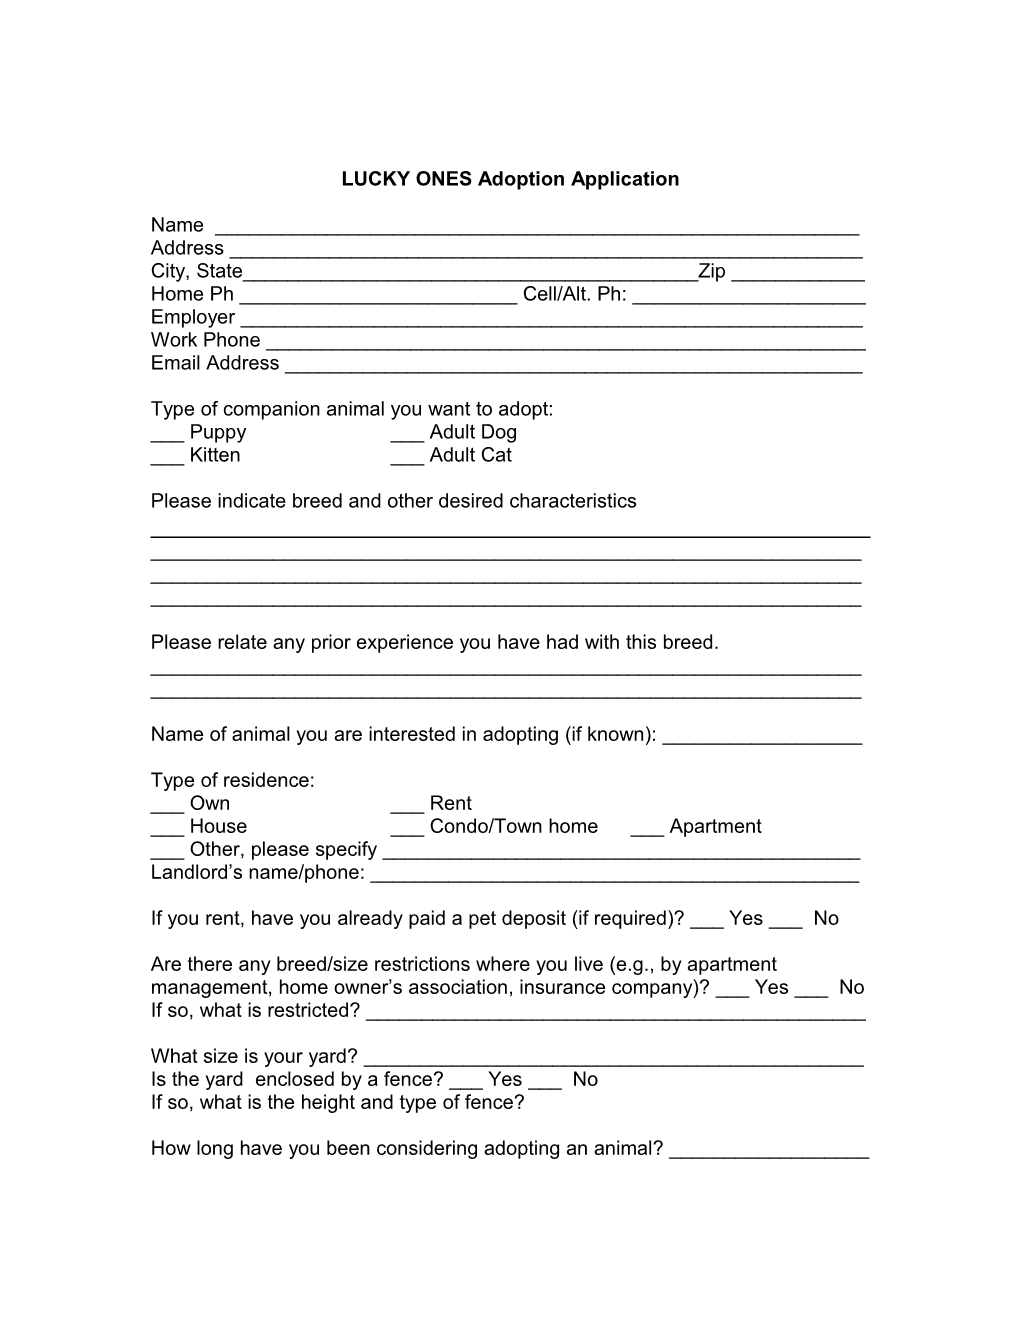 LUCKY ONES Adoption Application